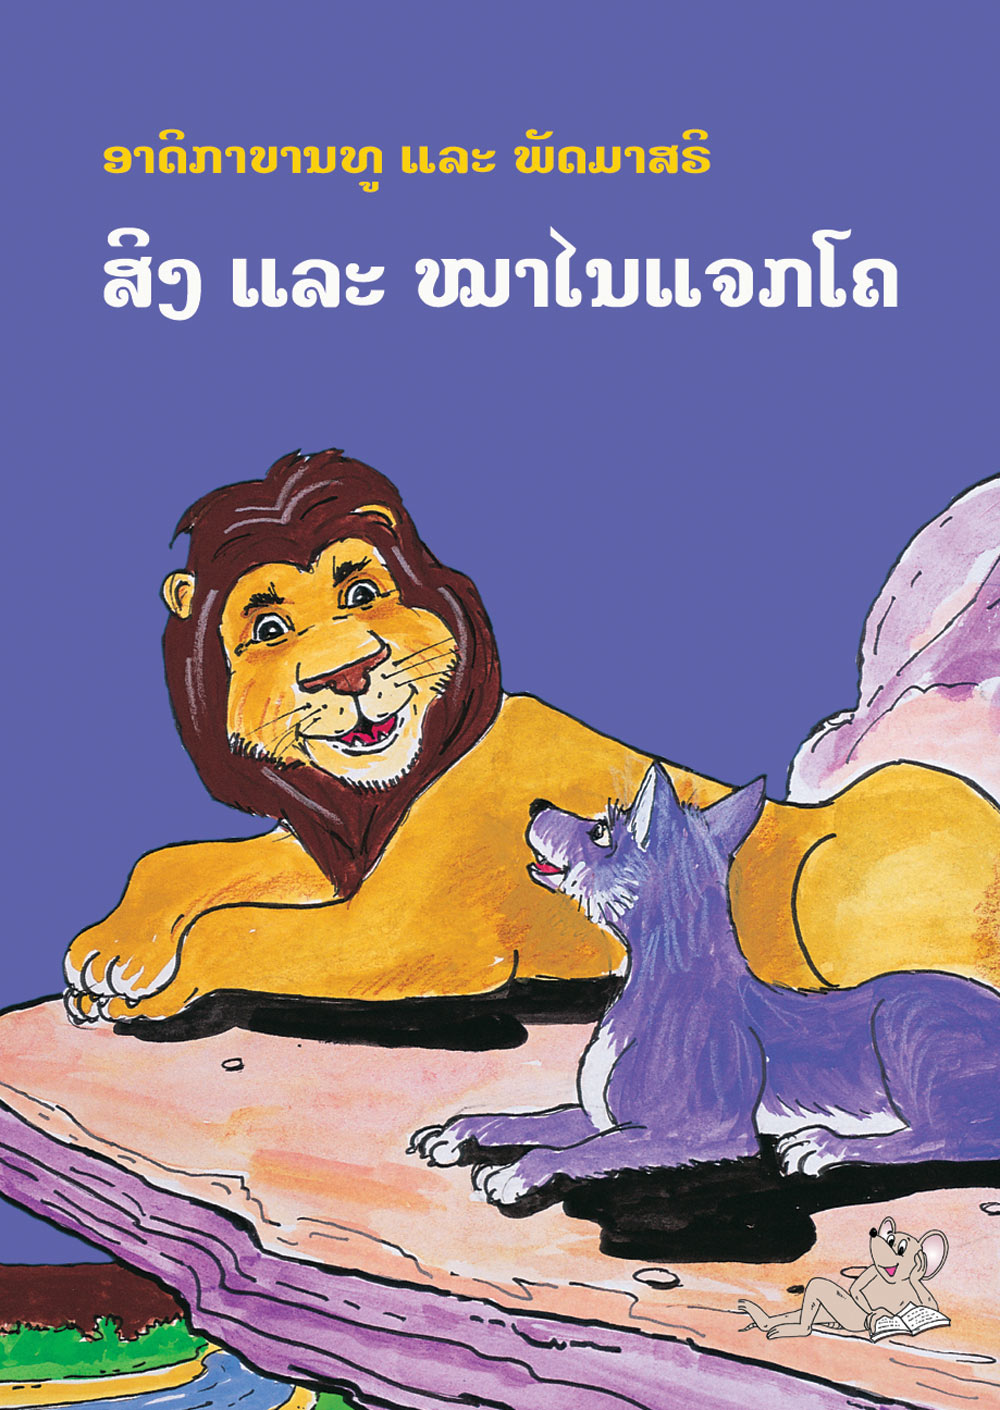 The Lion and the Jackal large book cover, published in Lao language